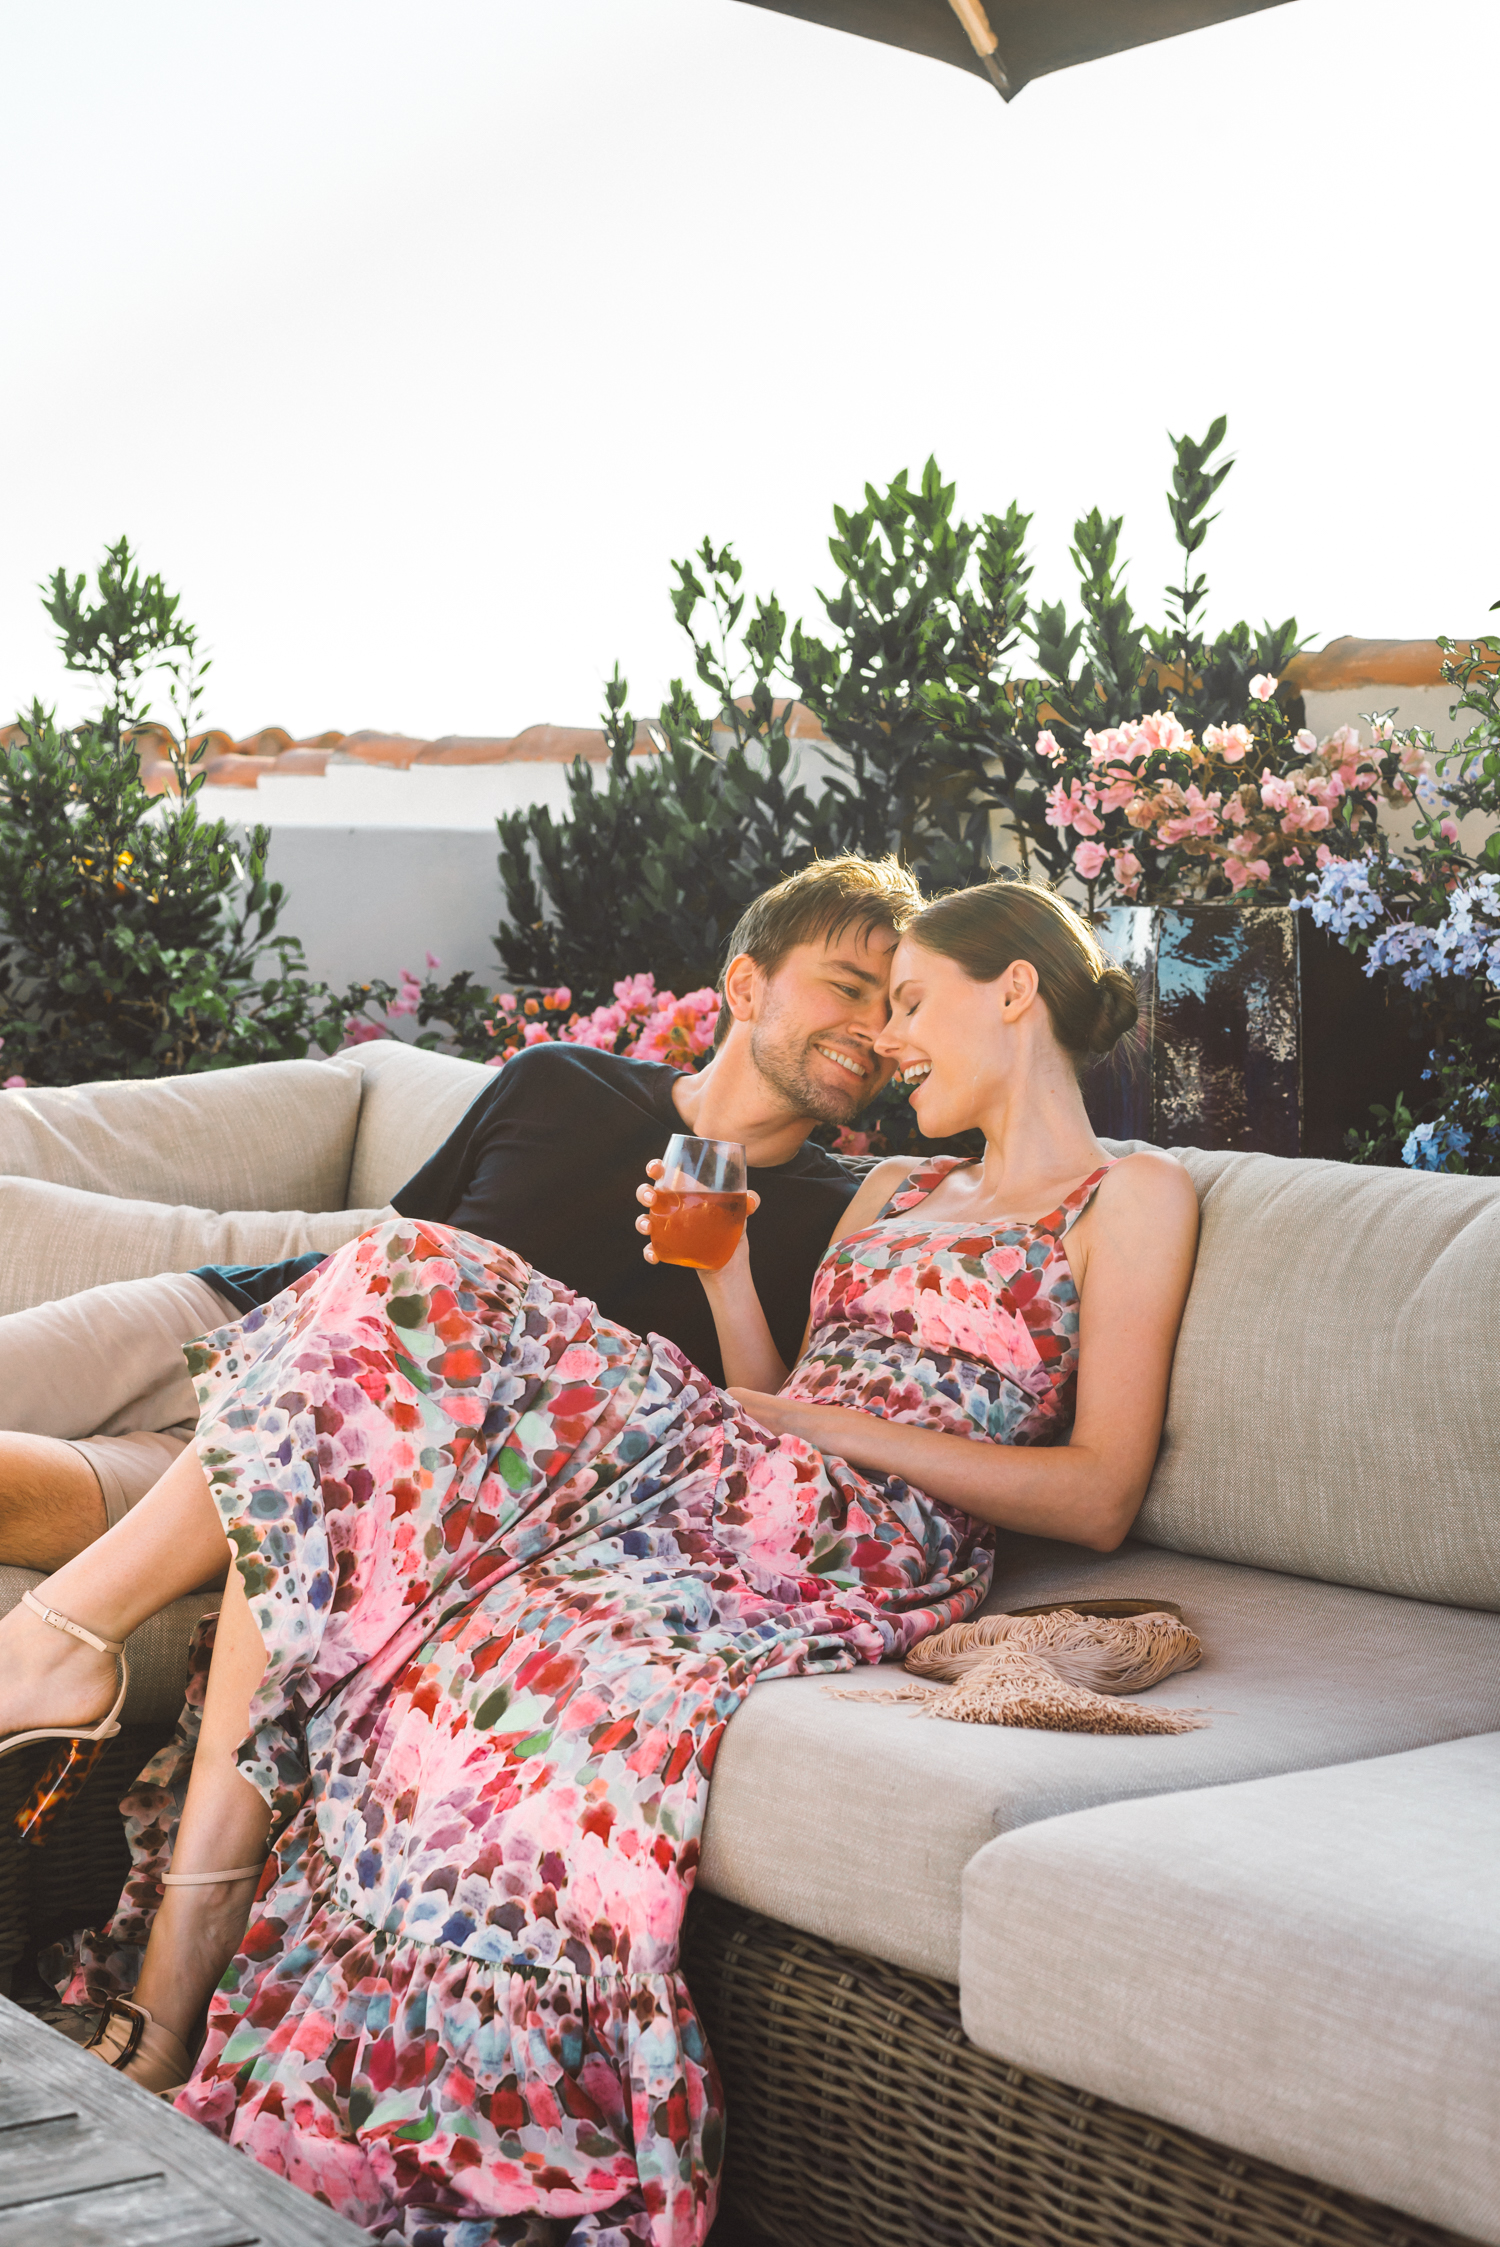 Alyssa Campanella of The A List blog visits Hotel Californian in Santa Barbara with Torrance Coombs for an anniversary trip.